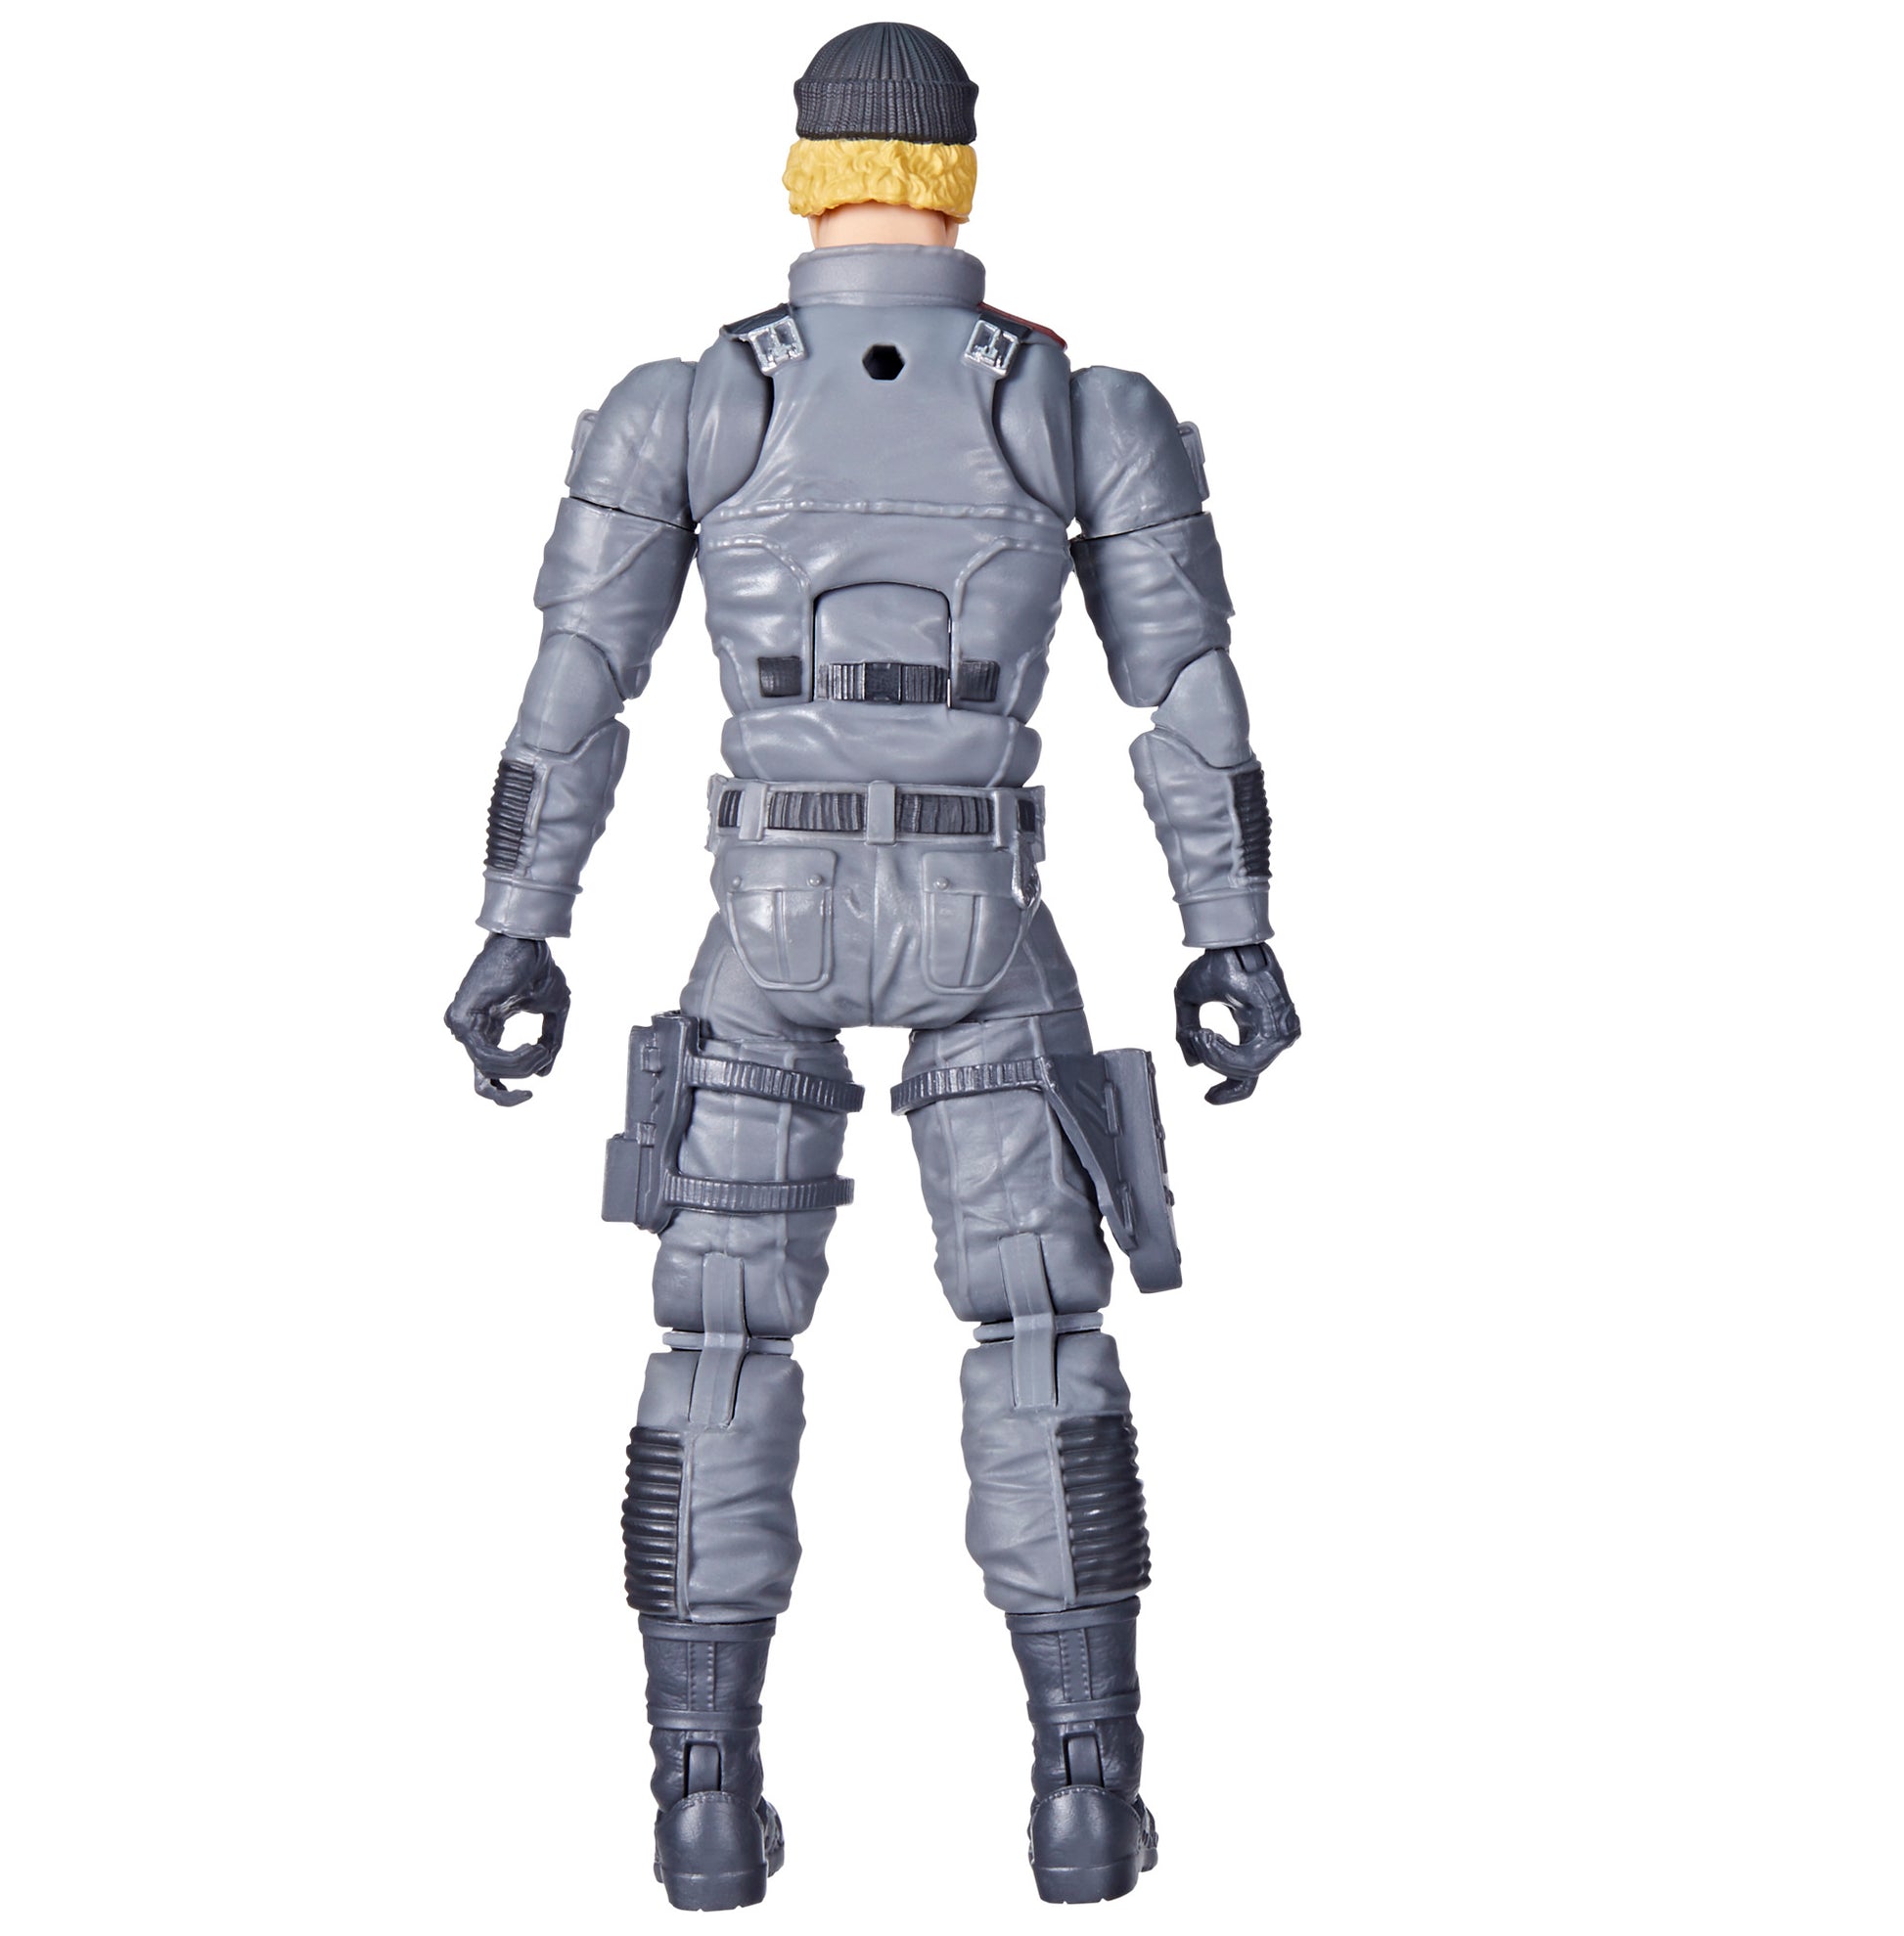 G.I. Joe Classified Series Low-Light, 86 Action Figure Toy back view - Heretoserveyou